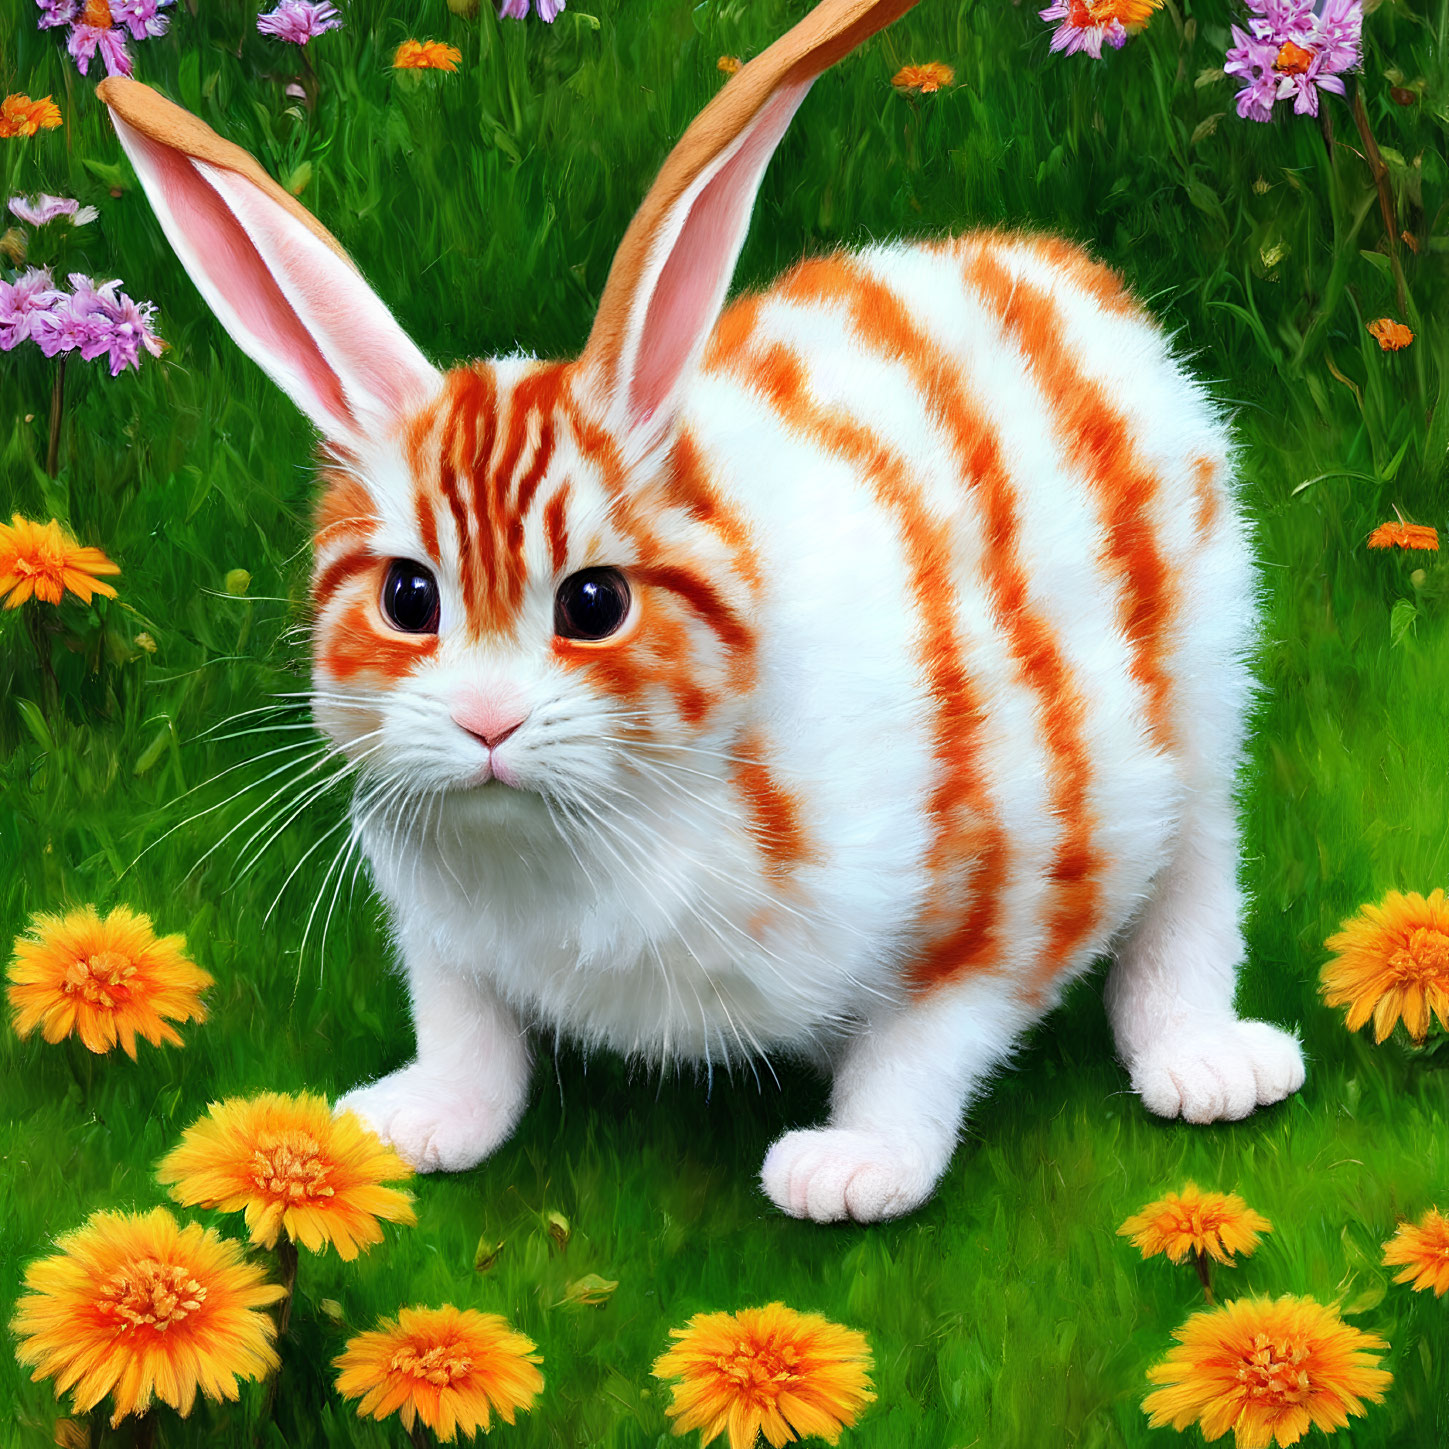 White Rabbit with Orange Stripes on Green Grass and Yellow Flowers